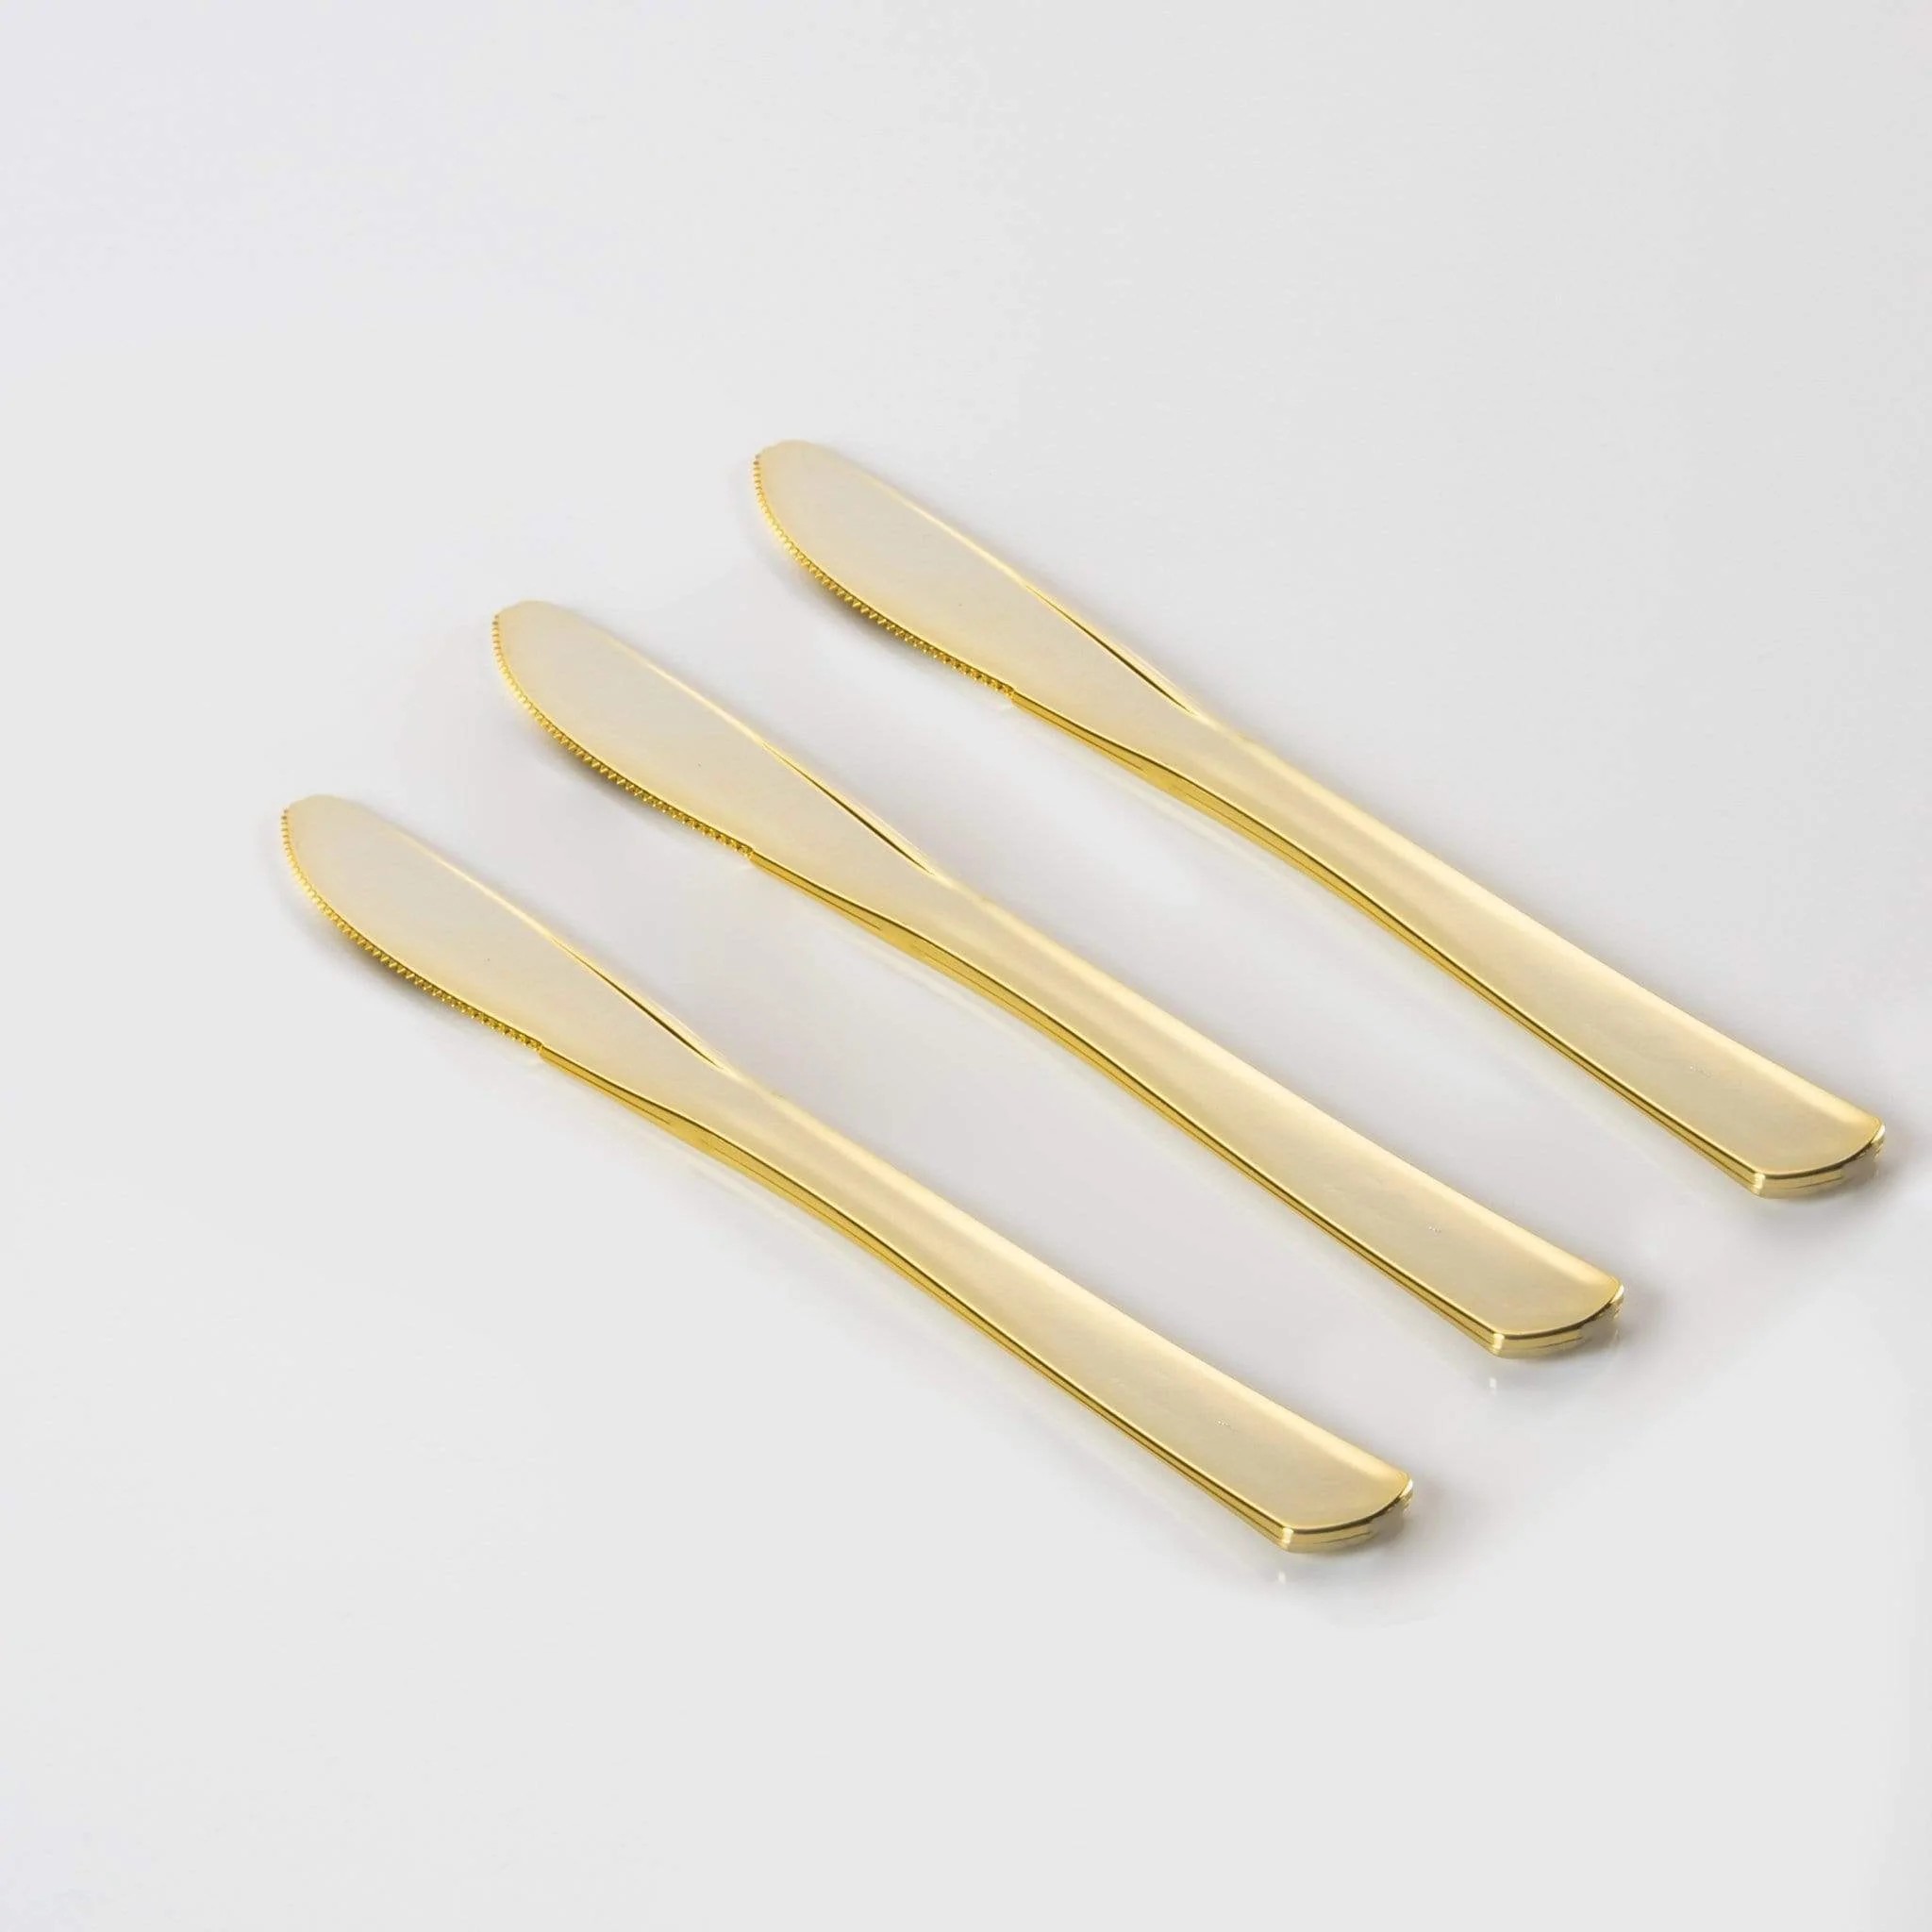 Luxe Party Classic Design Gold Plastic Knives - 20 pcs